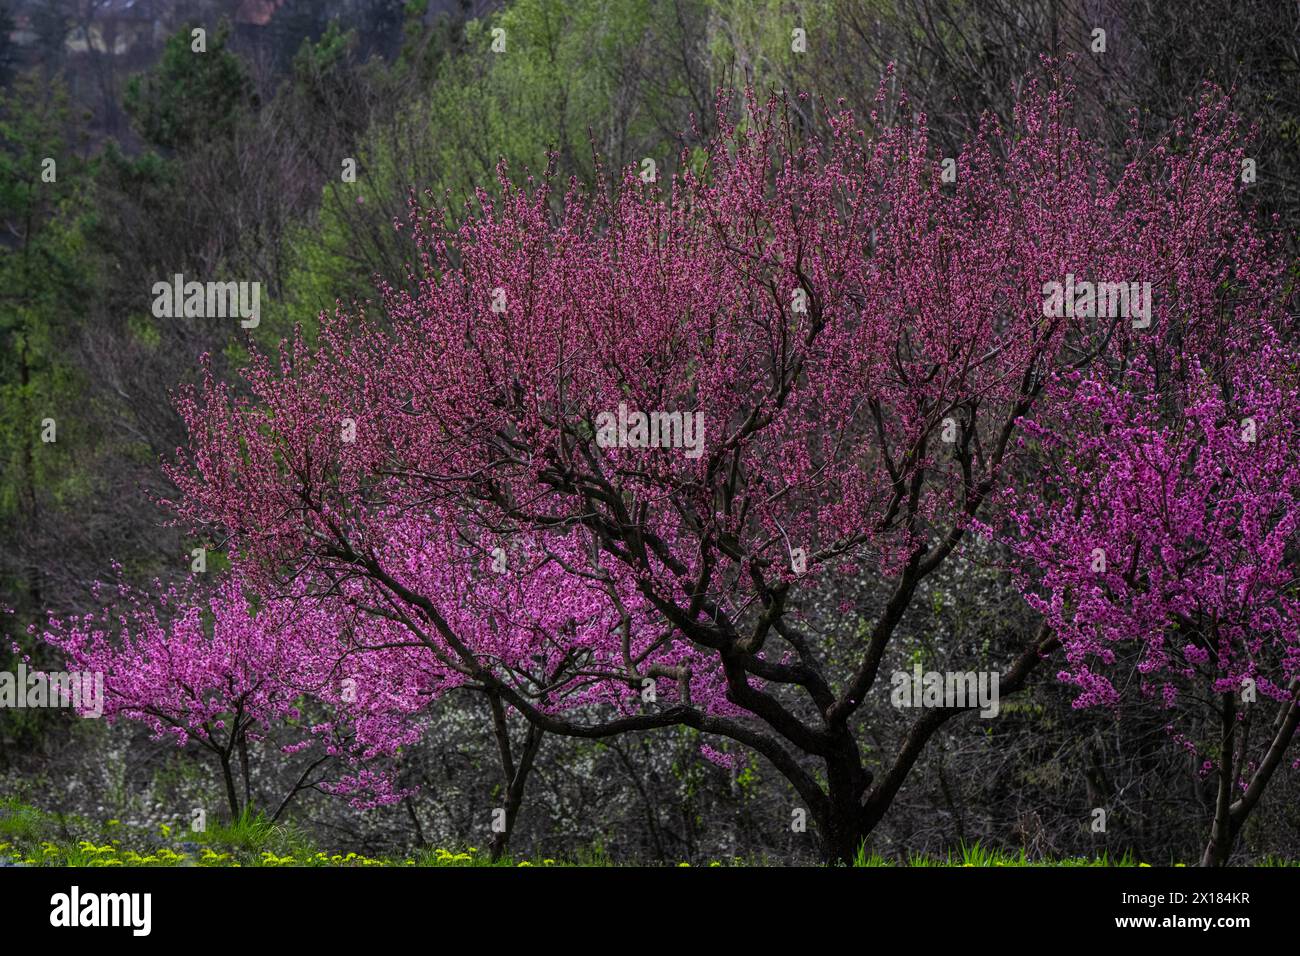 Pink-coloured ornamental shrubs and trees Family of ornamental cherries, Southern Styria, Austria Stock Photo